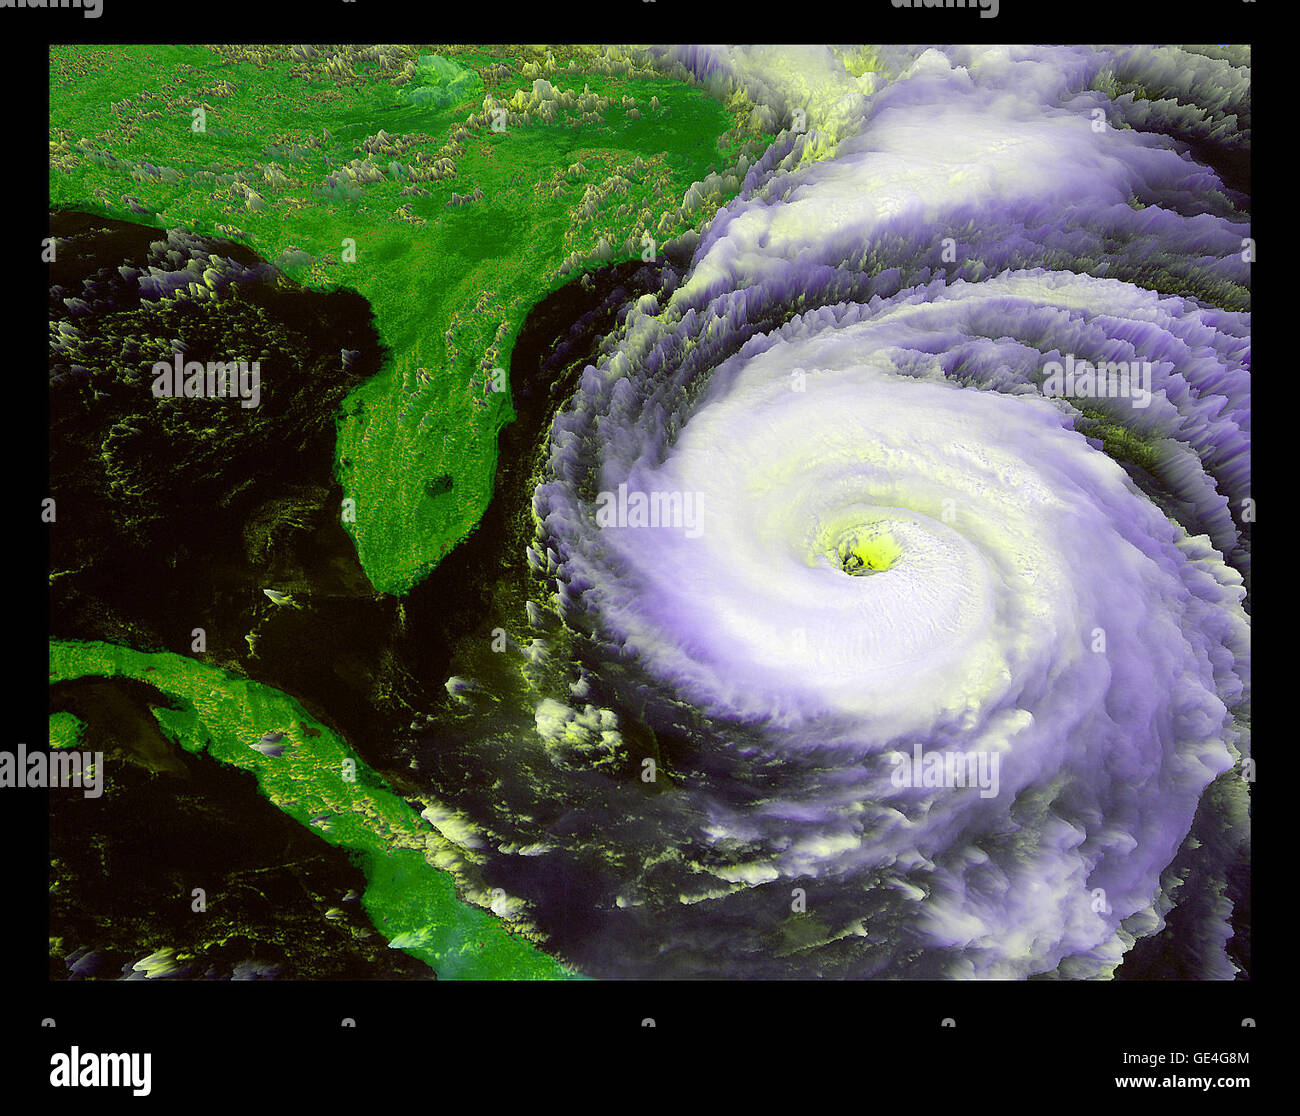 The GOES weather satellites took this image of Hurricane Fran just as it was beginning its disastrous journey north along the East Coast in 1996. The storm slammed into North Carolina's southern coast on September 5 with sustained winds of approximately 115 mph and gusts as high as 125 mph. At one point, 1.7 million customers in North Carolina and 400,000 customers in Virginia lost electricity. The storm caused about $5 billion in damages in North Carolina alone, making Fran the third most costly hurricane in U.S. history. Stock Photo